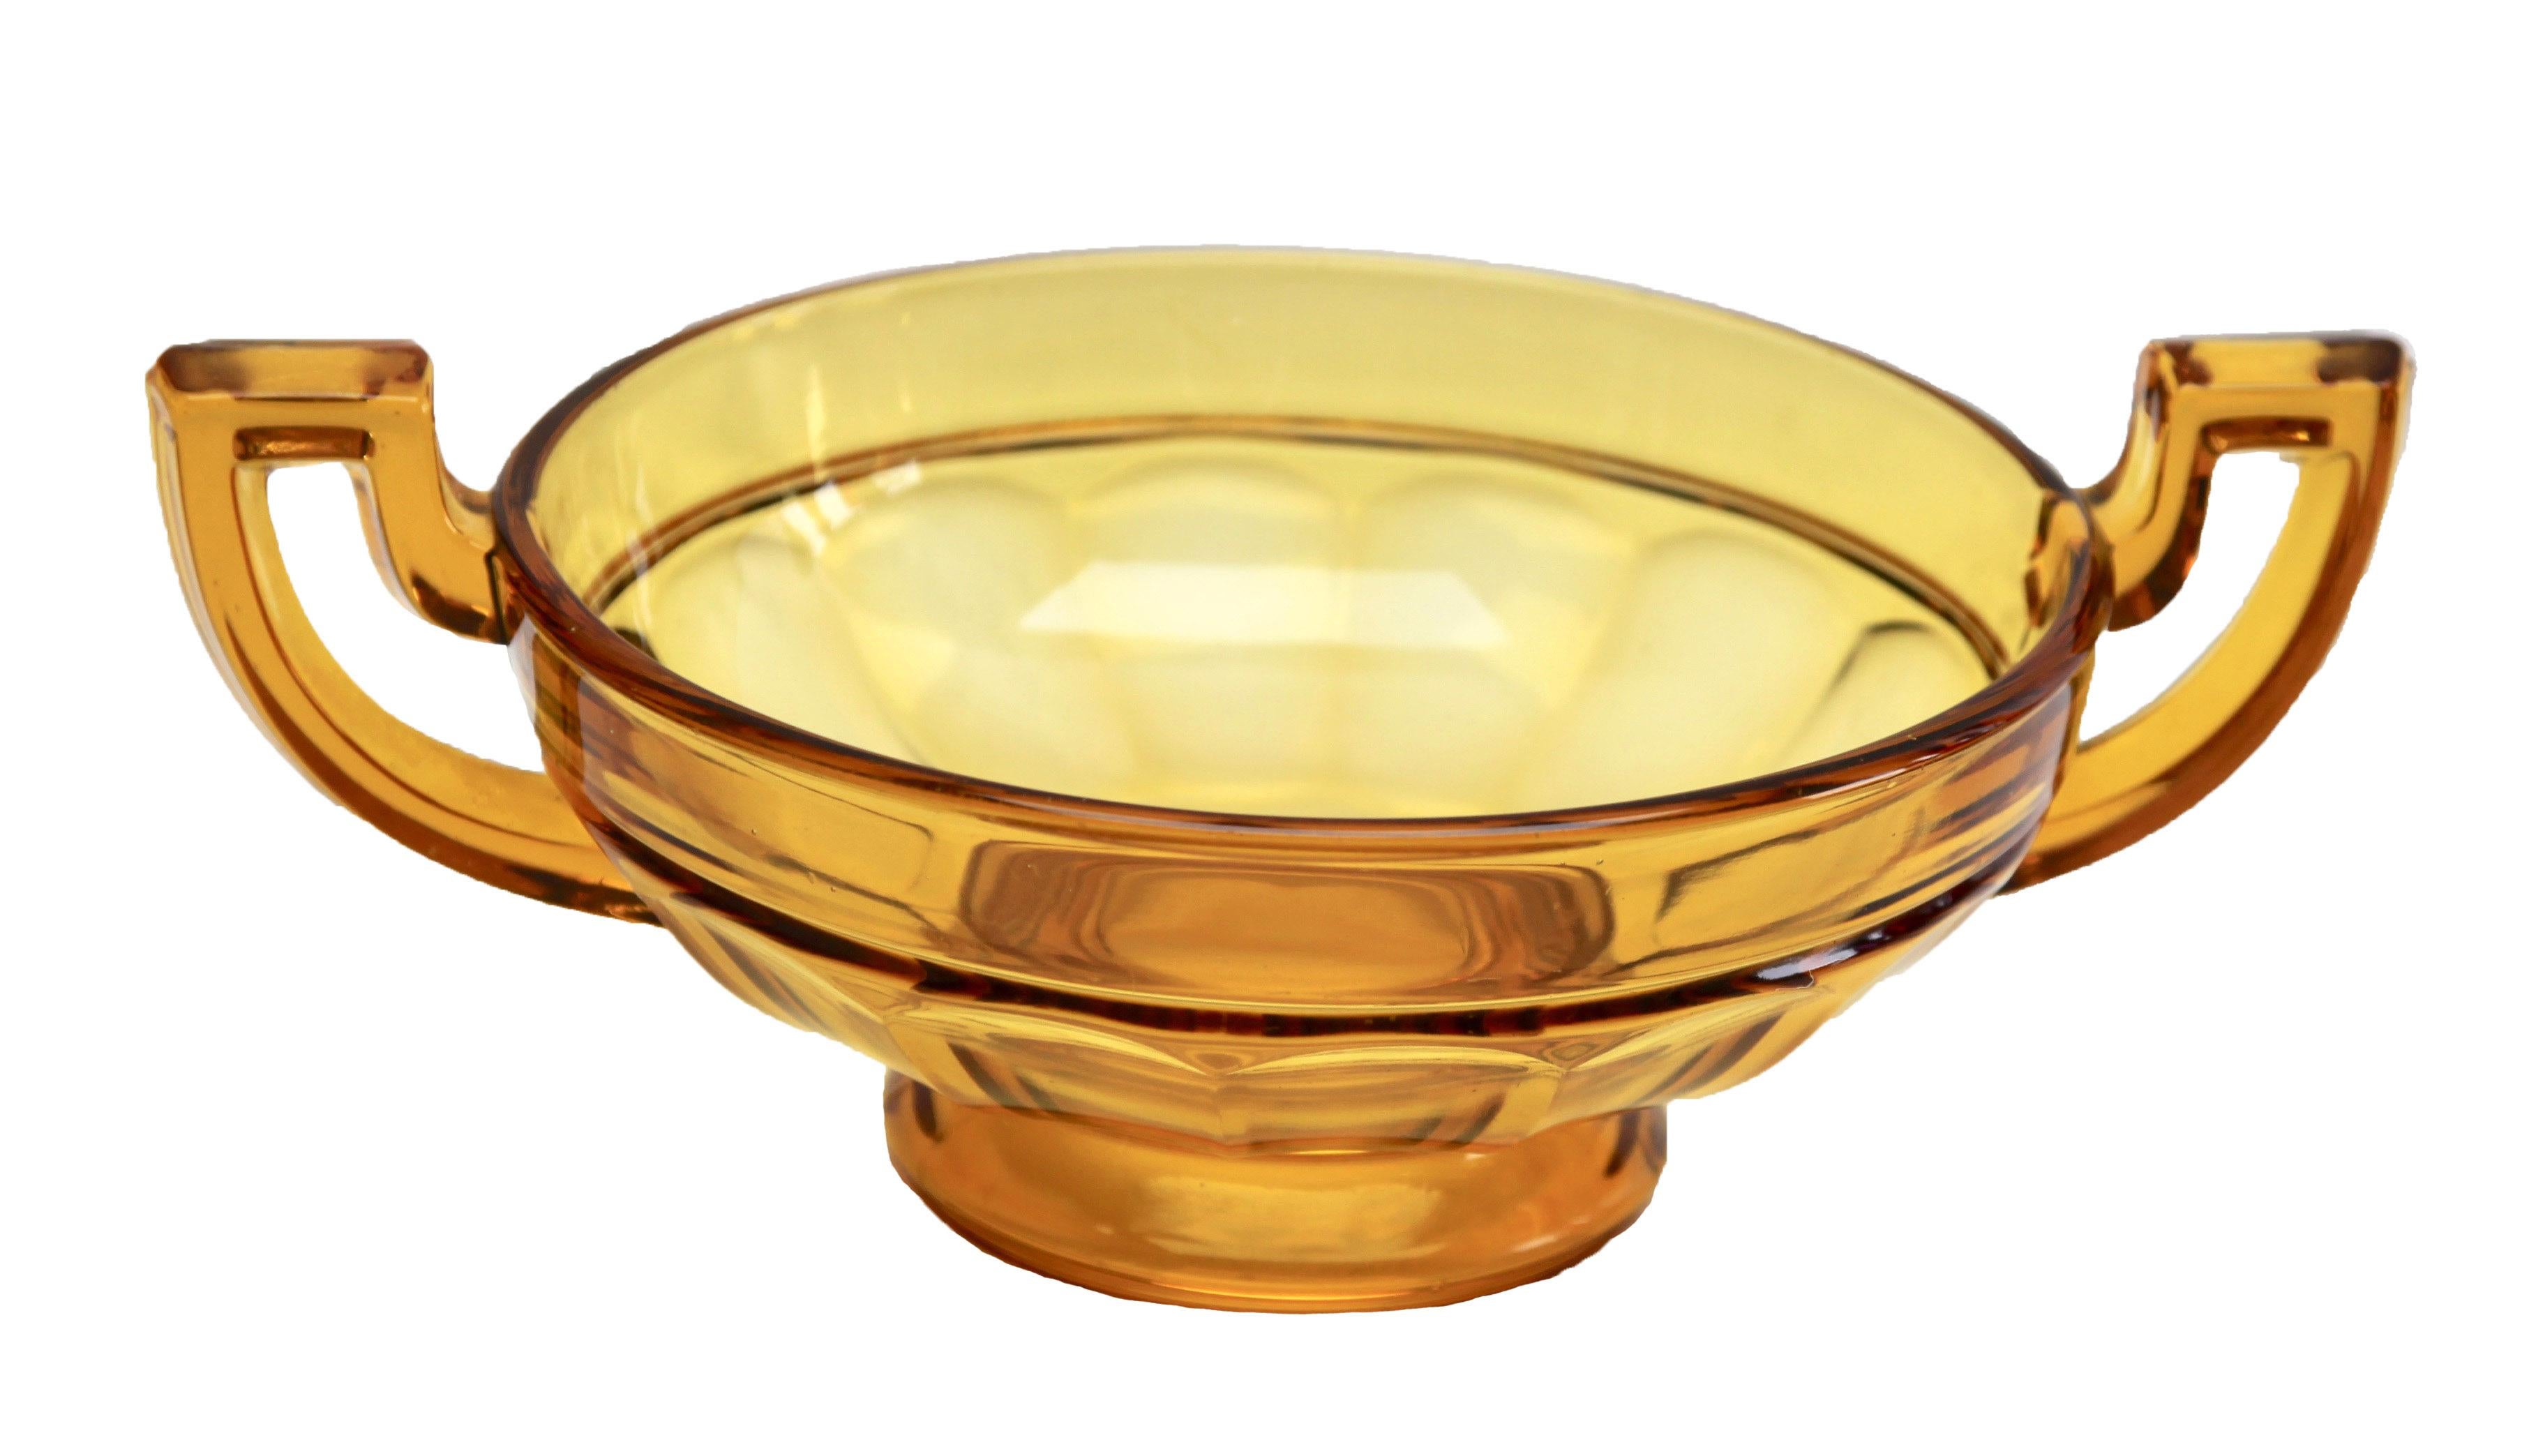 The circular version of this bowl design in glass, made by Val Saint Lambert for their Luxval series. The vase is marked on the inside: 